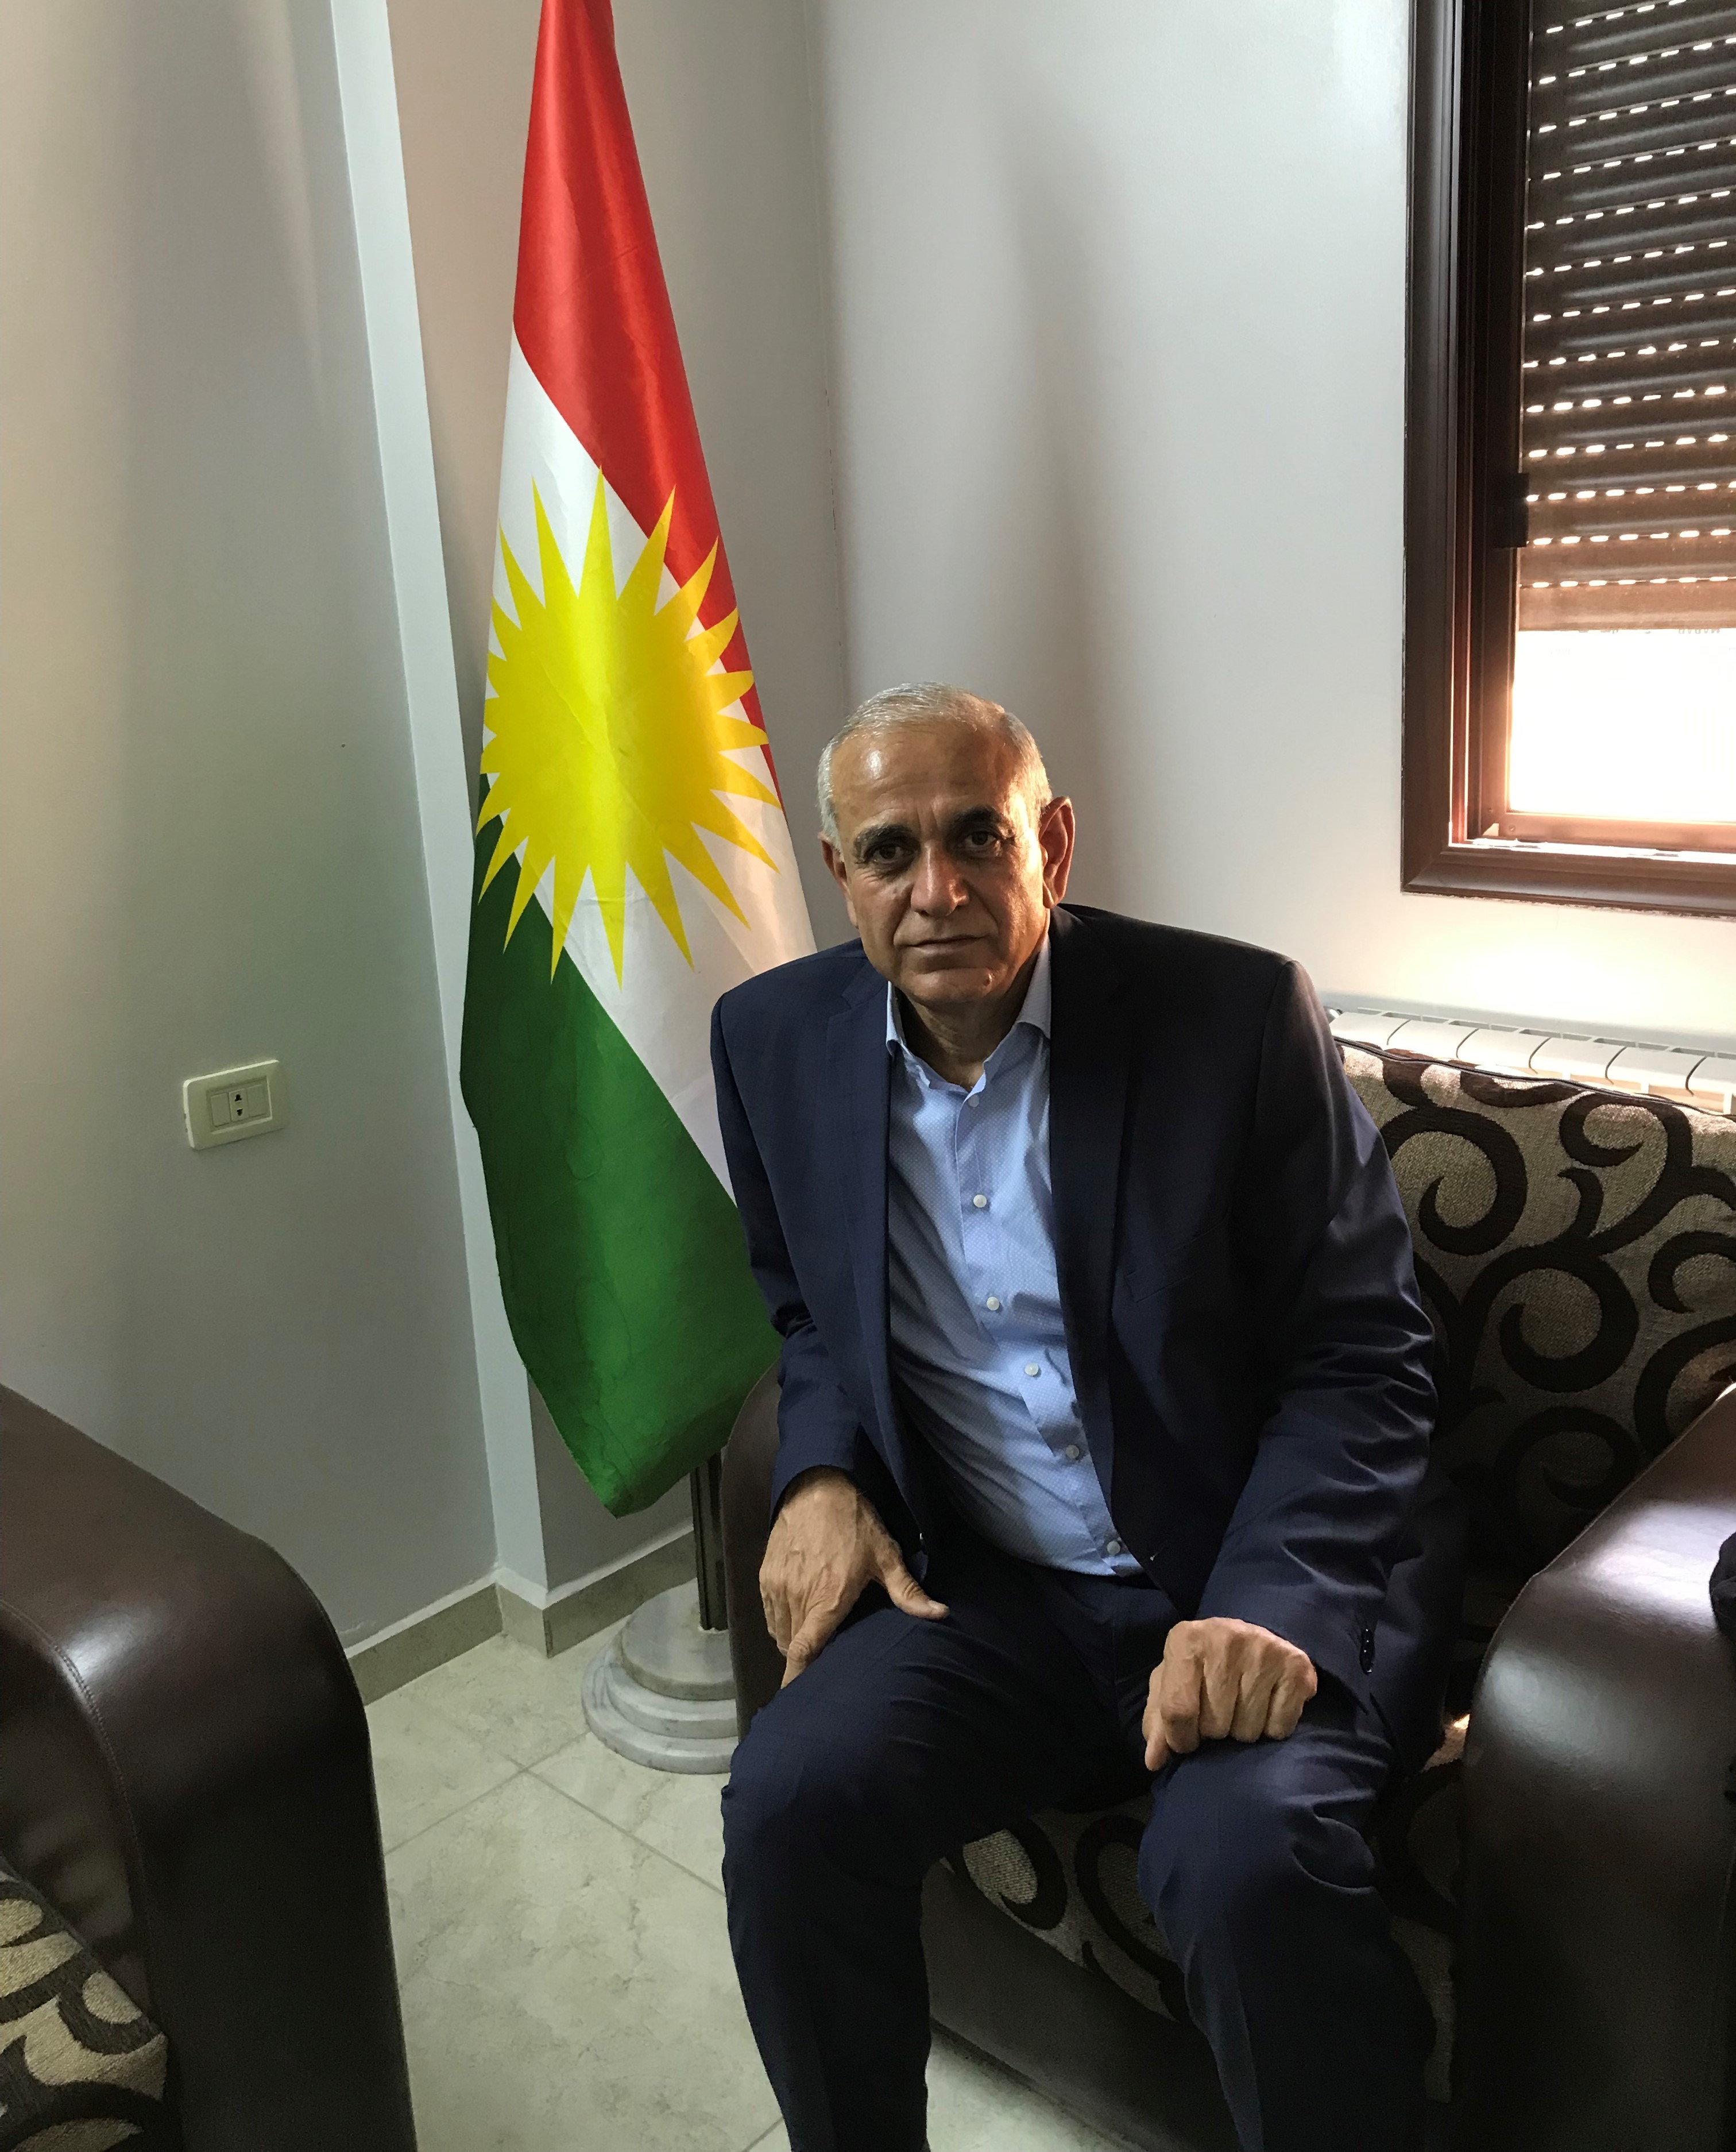 Suliman Osso is secretary-general of the Yekiti Party and a leading member of the Kurdish National Council (photo: Kristin Helberg)